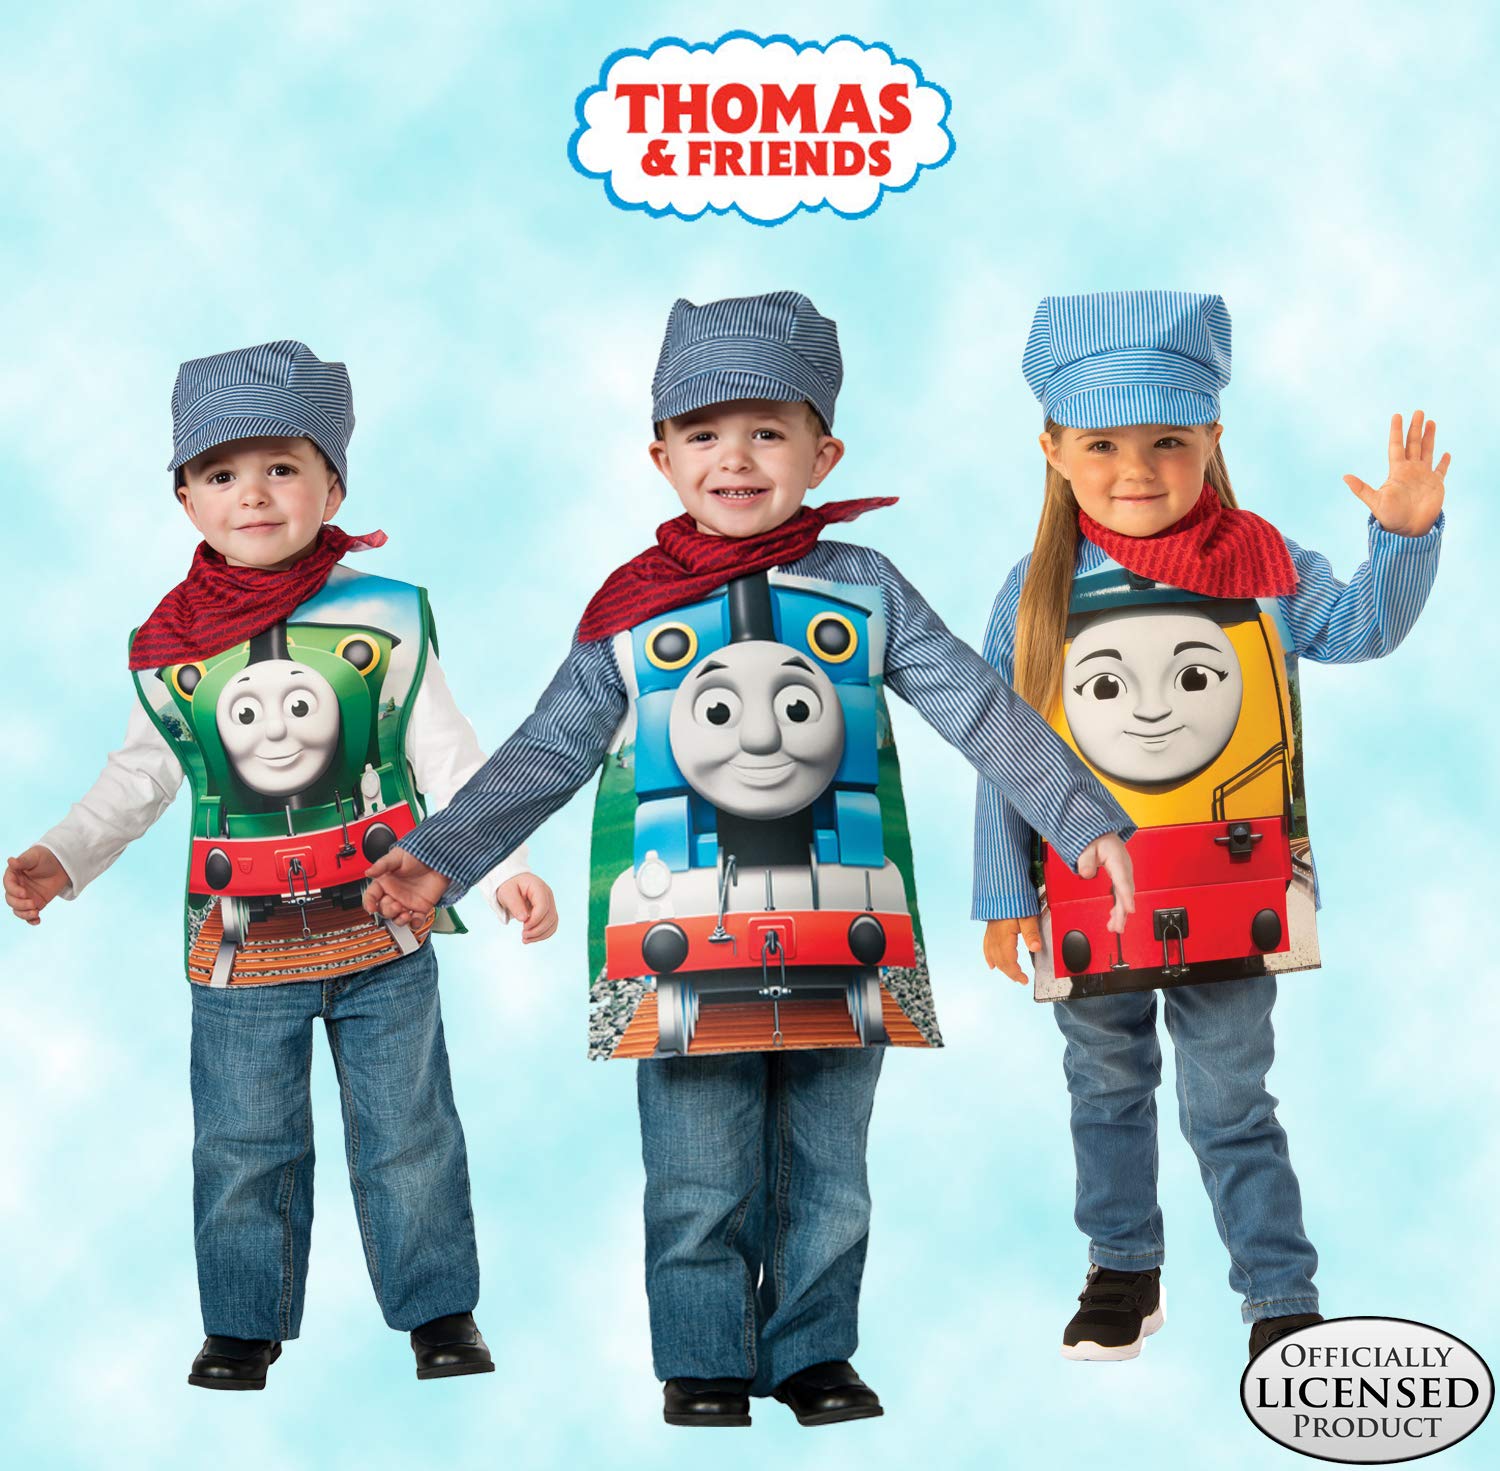 Rubies Thomas and Friends, Deluxe Thomas the Tank Engine and Engineer Costume, Toddler - Toddler One Color